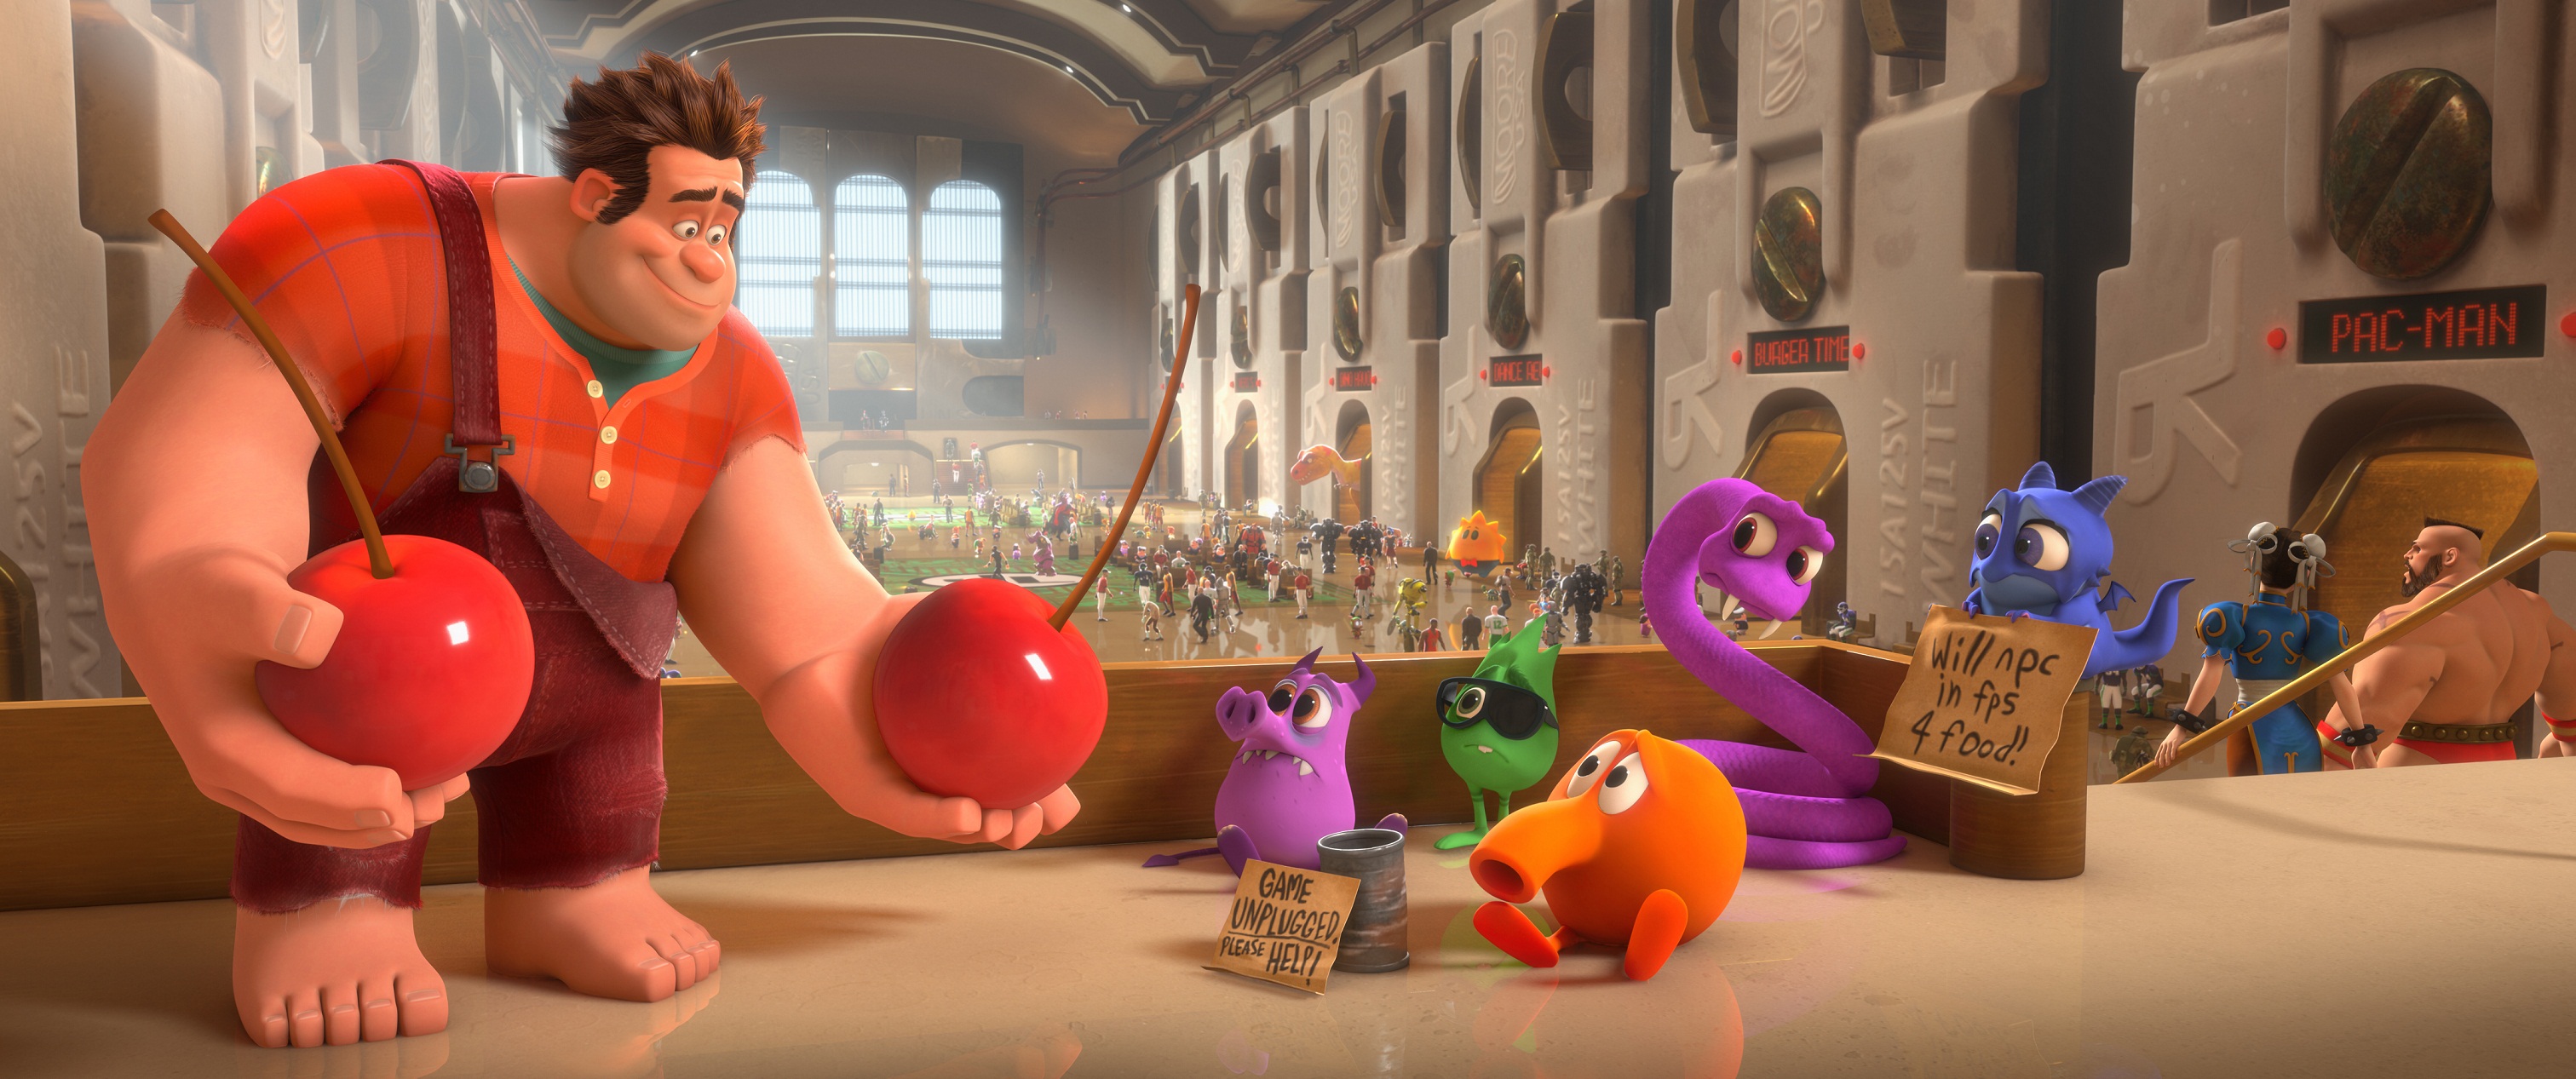 Four Images Power-Up For Disney's Videogame-Inspired 'Wreck-It Ralph'3024 x 1267